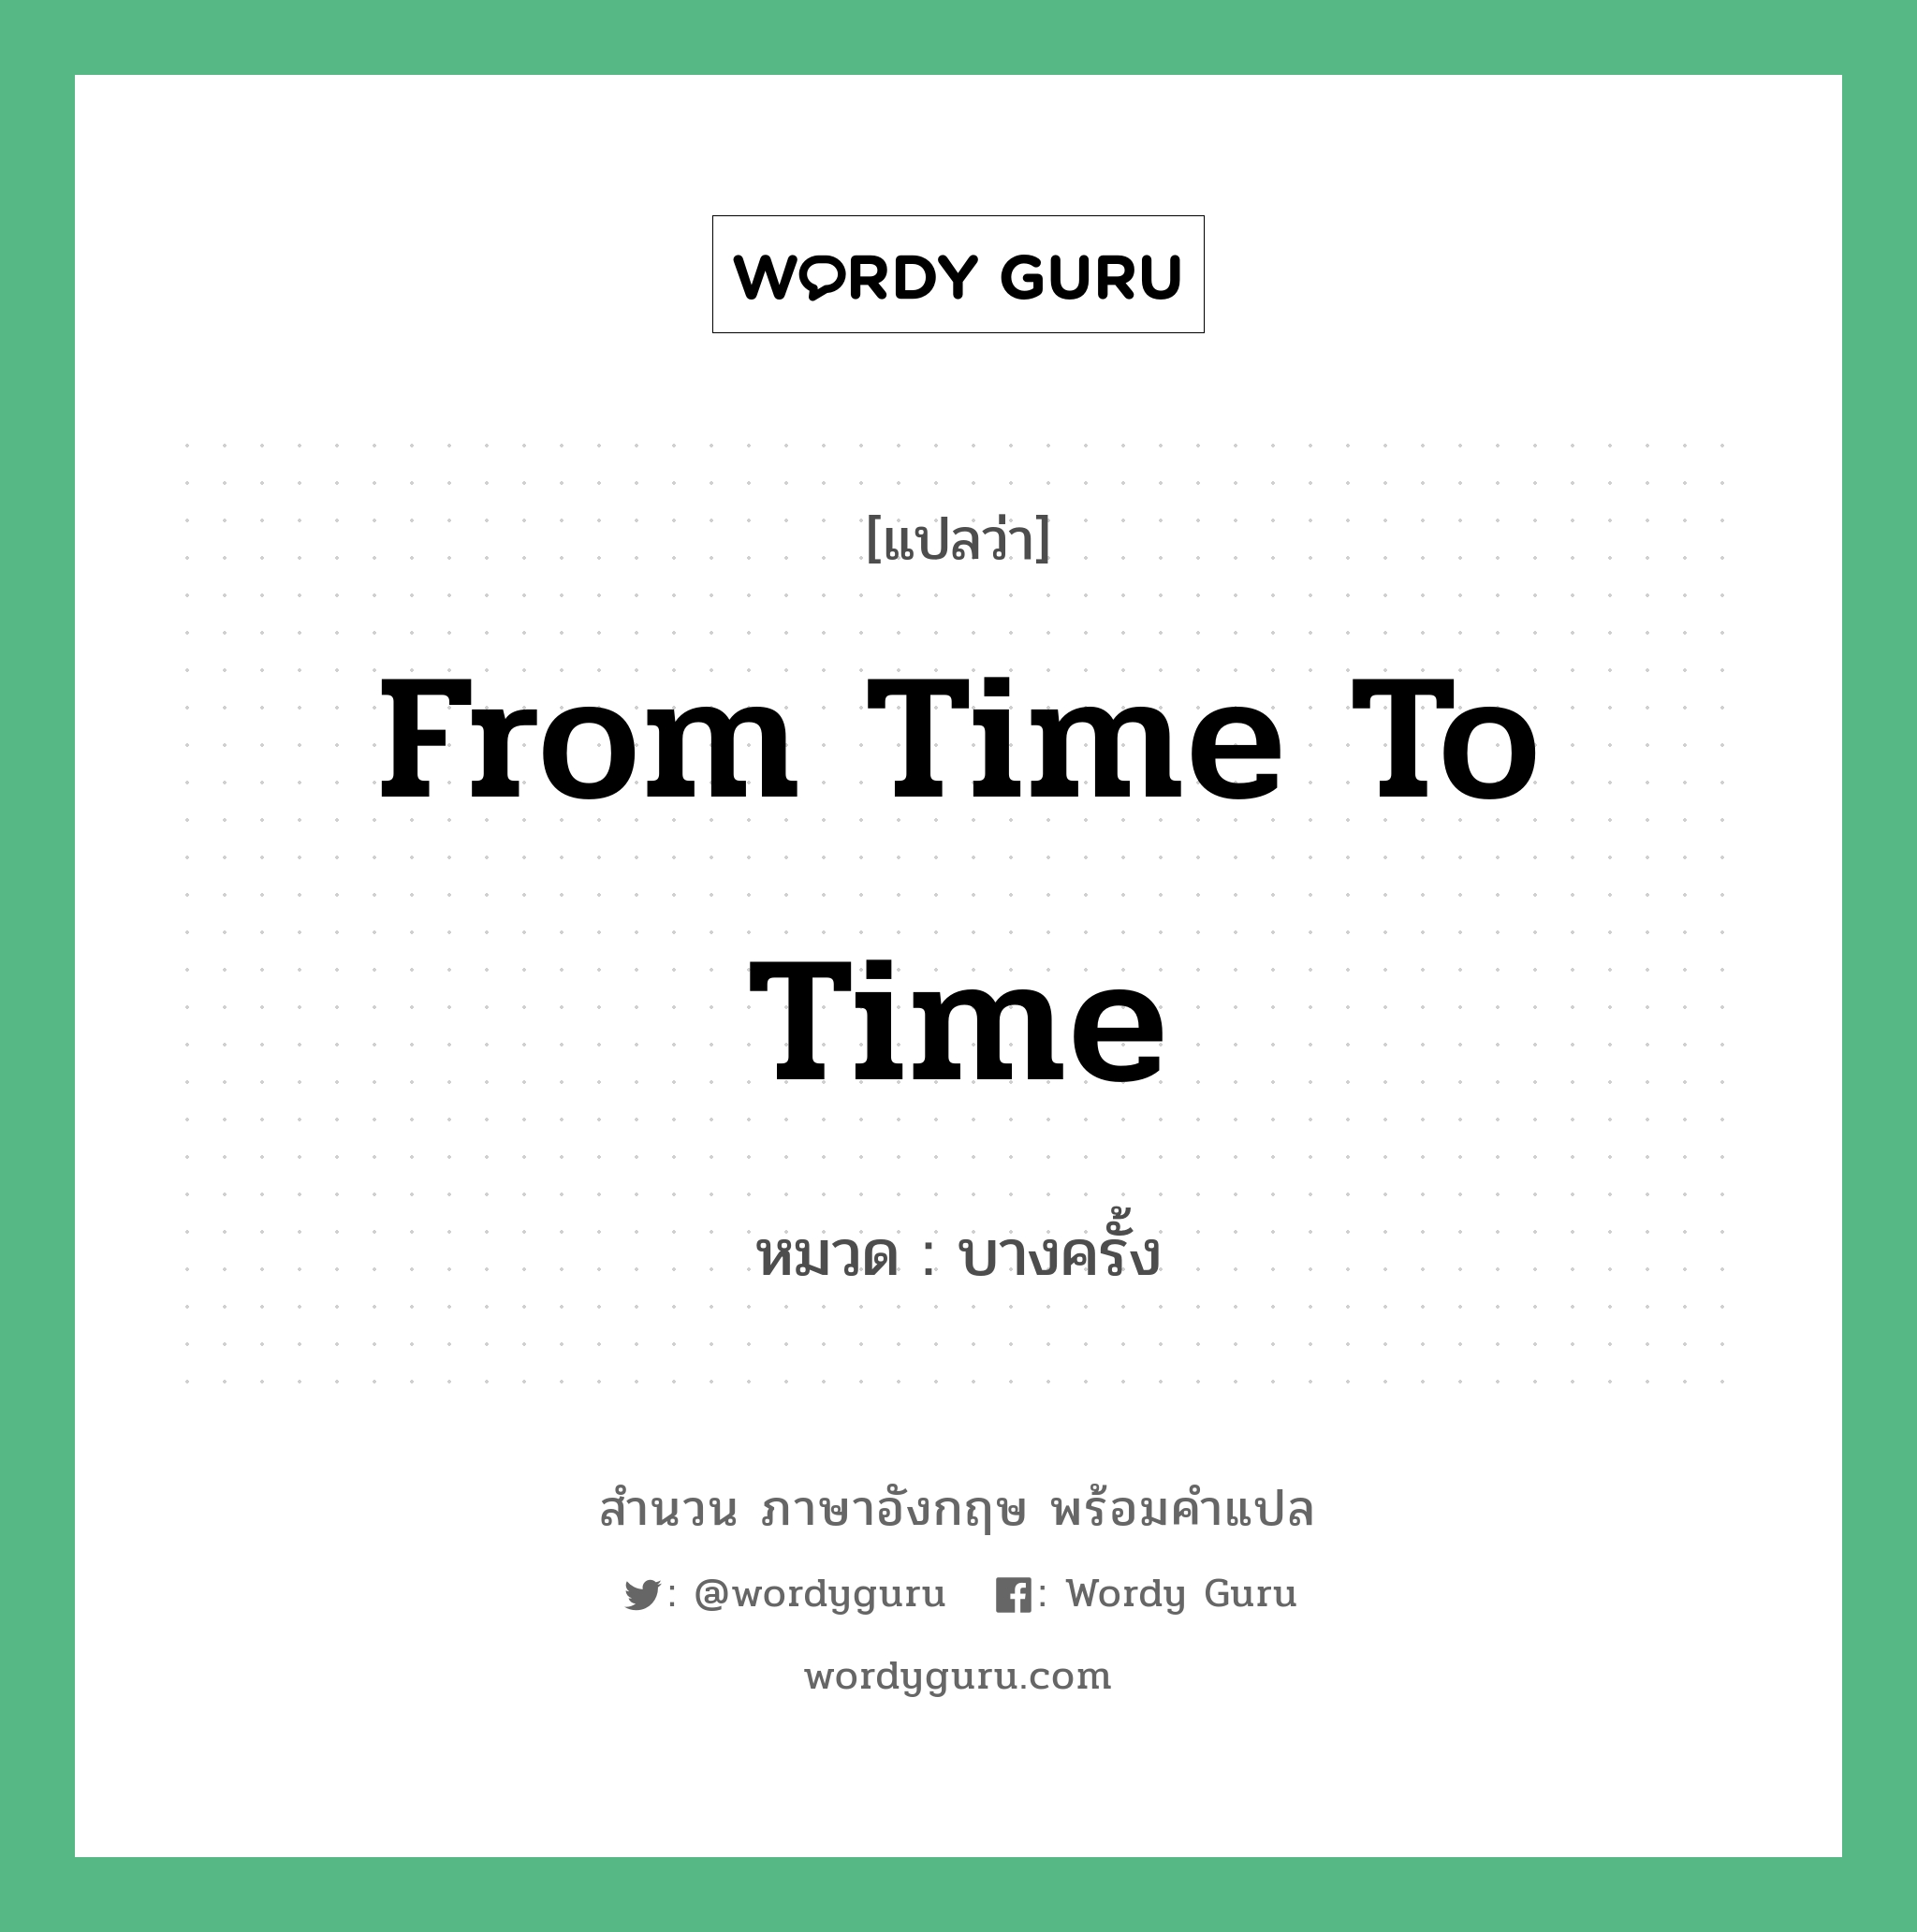 From time to time แปลว่า?, สำนวนภาษาอังกฤษ From time to time หมวด บางครั้ง